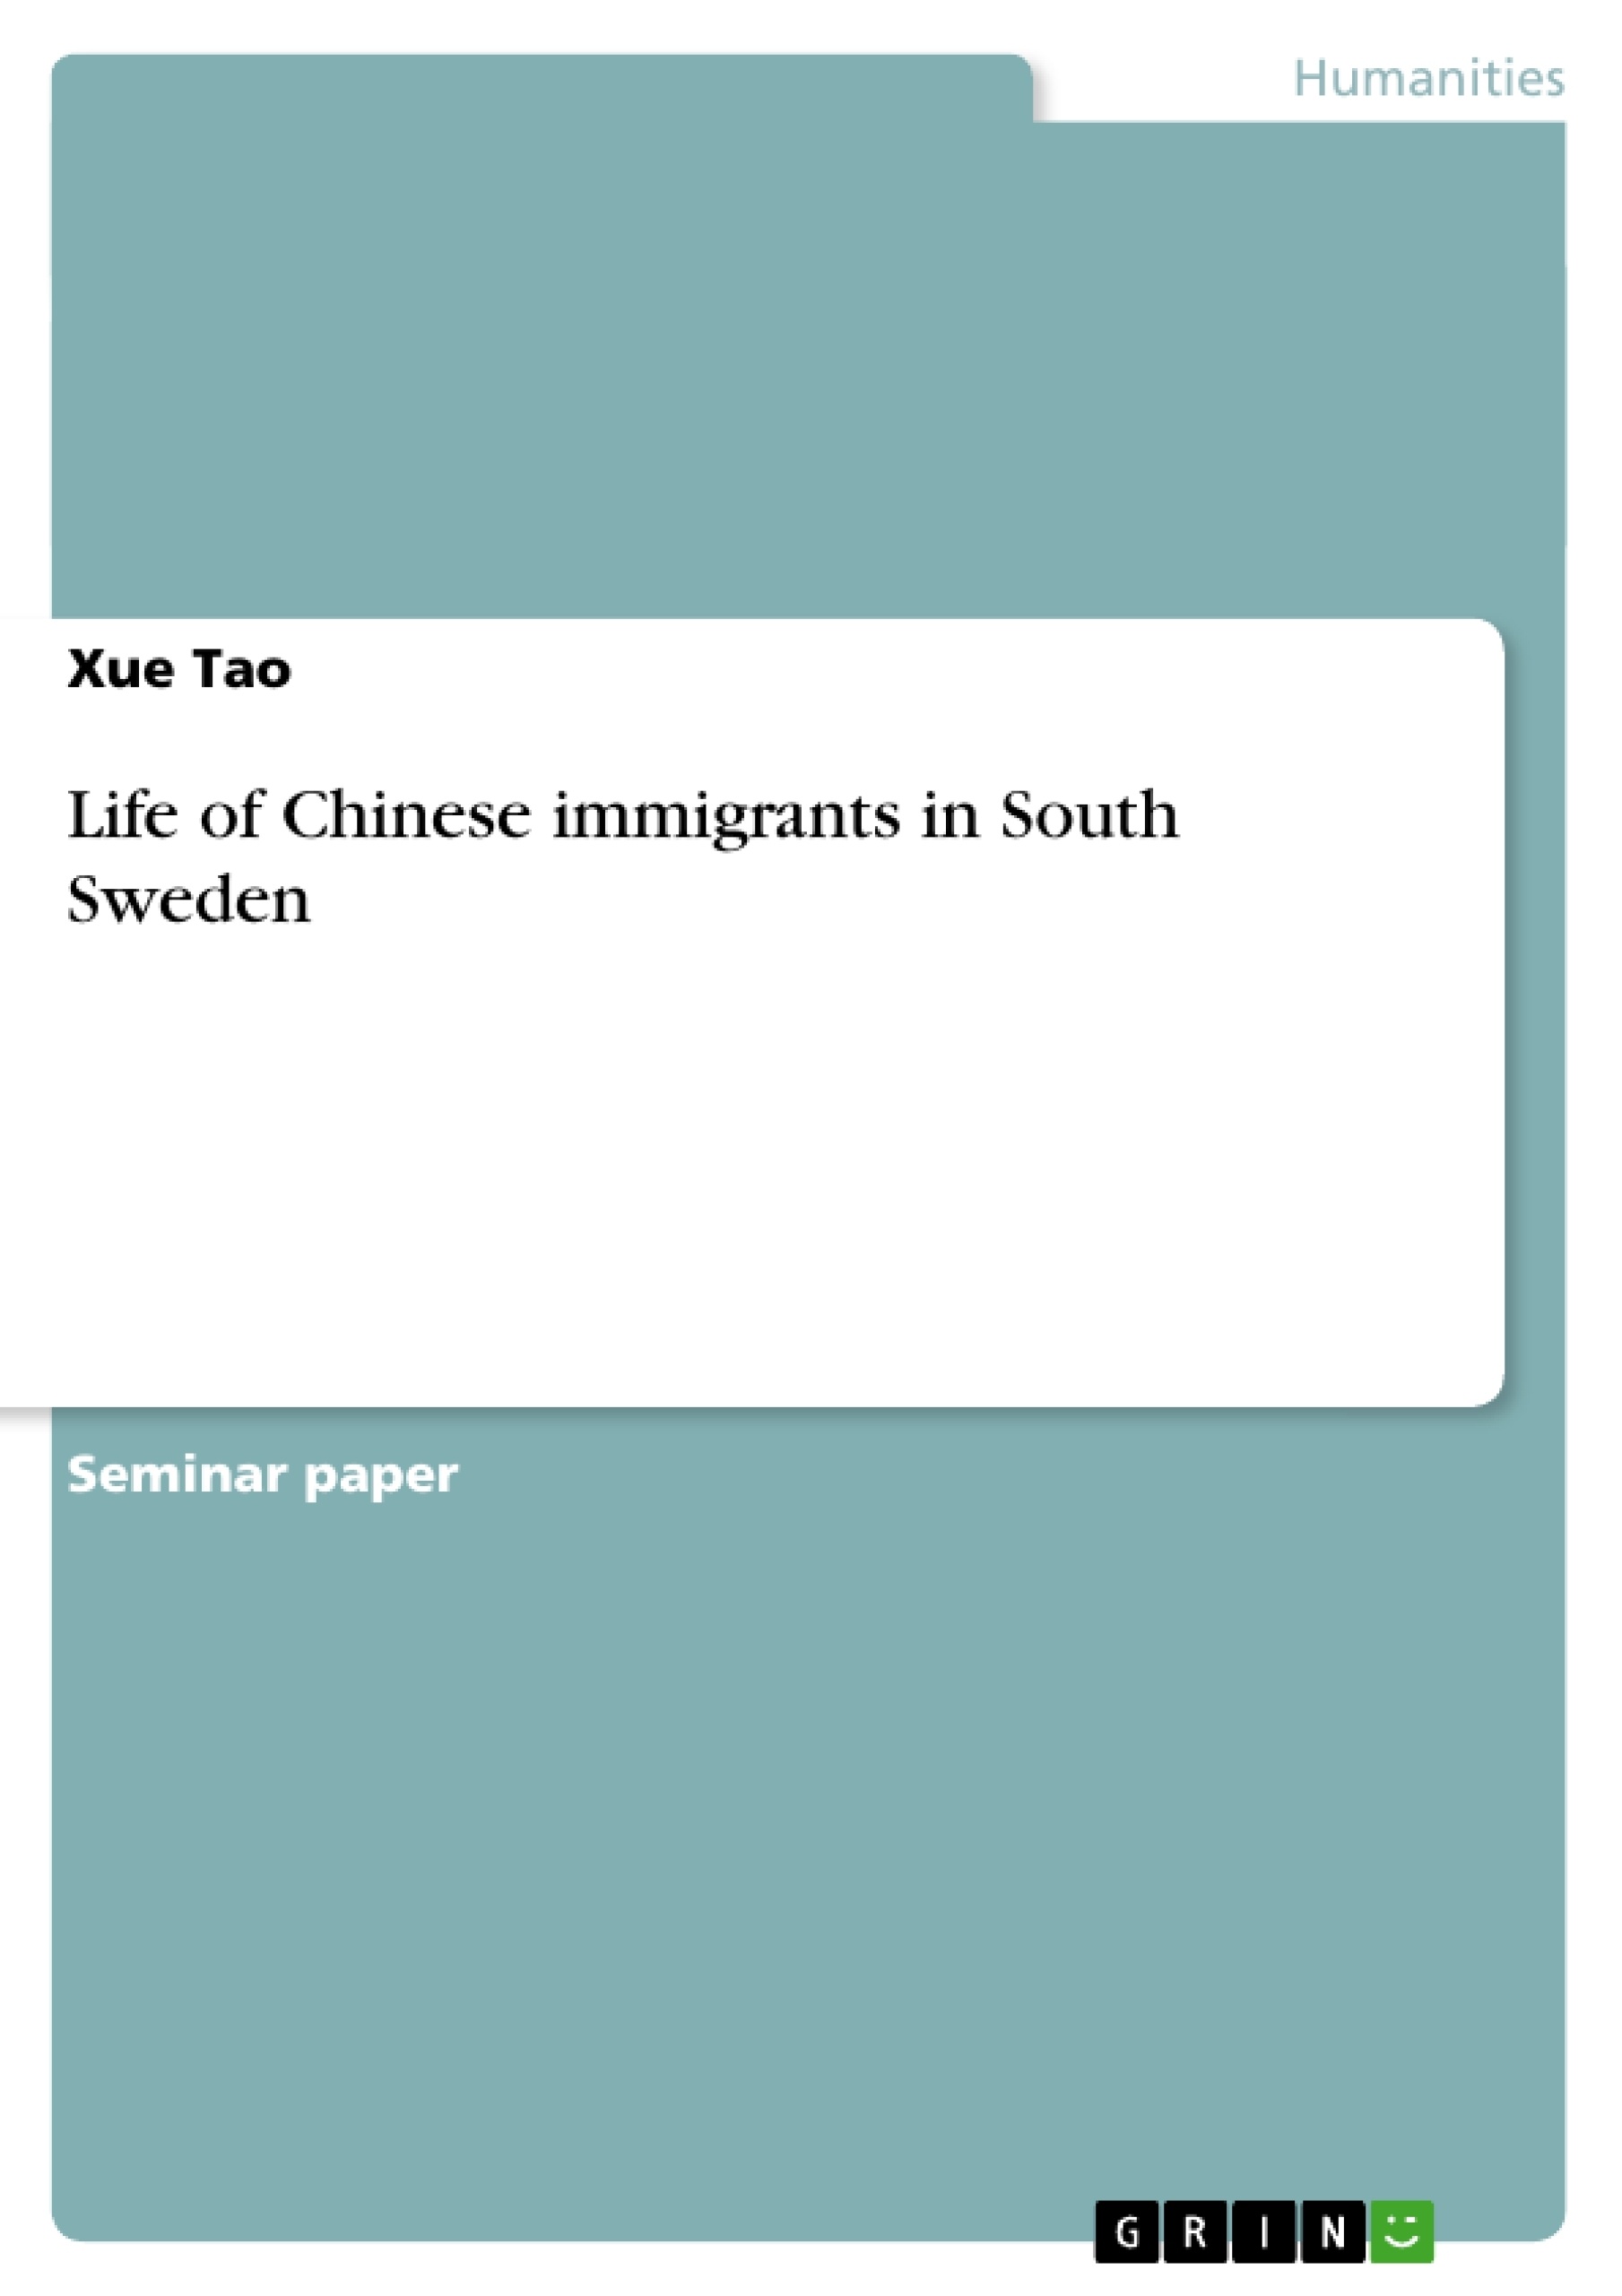 Título: Life of Chinese immigrants in South Sweden